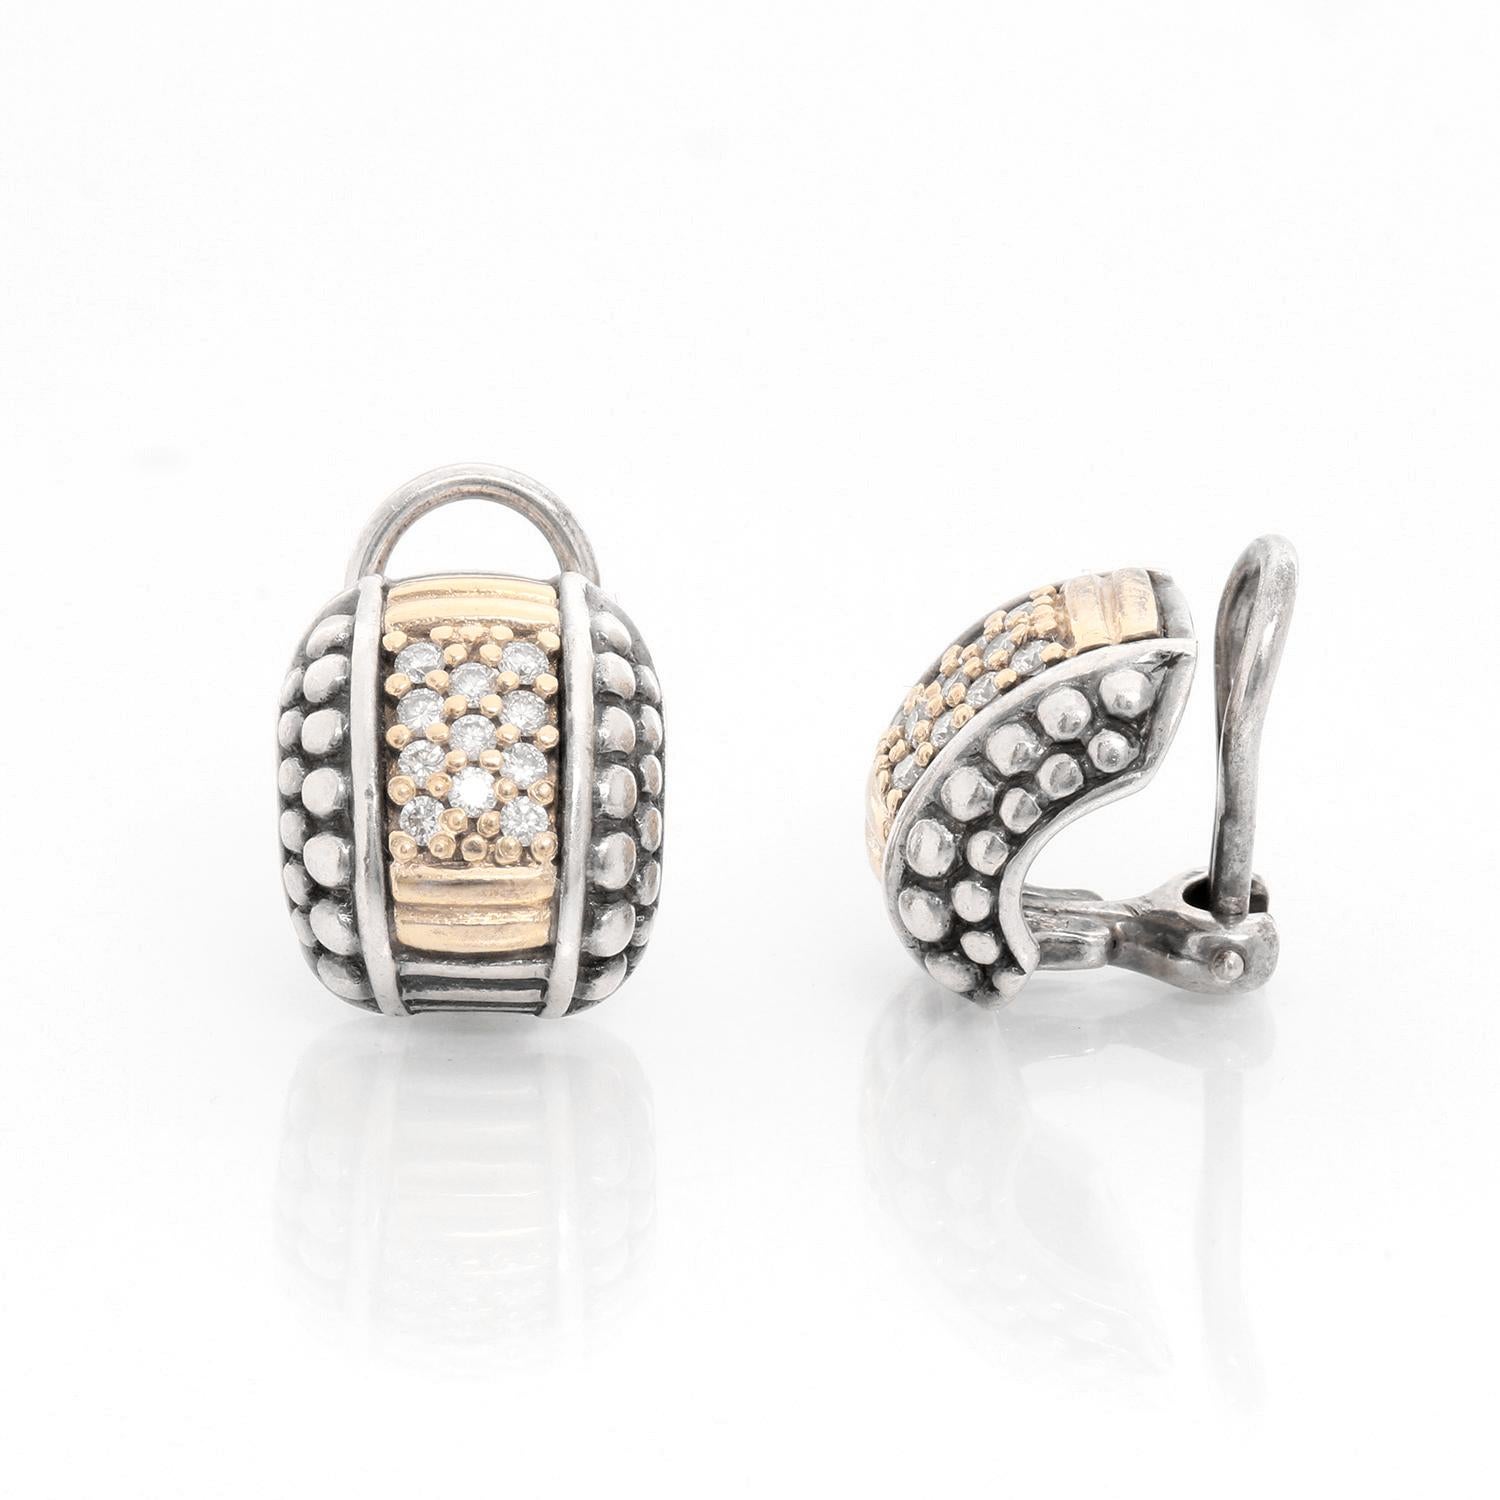 Lagos Caviar 18K Yellow gold and Sterling Silver Diamond Earrings  - 18K  Yellow gold earrings measuring 1/2 inch in lnegth. Omega Back.